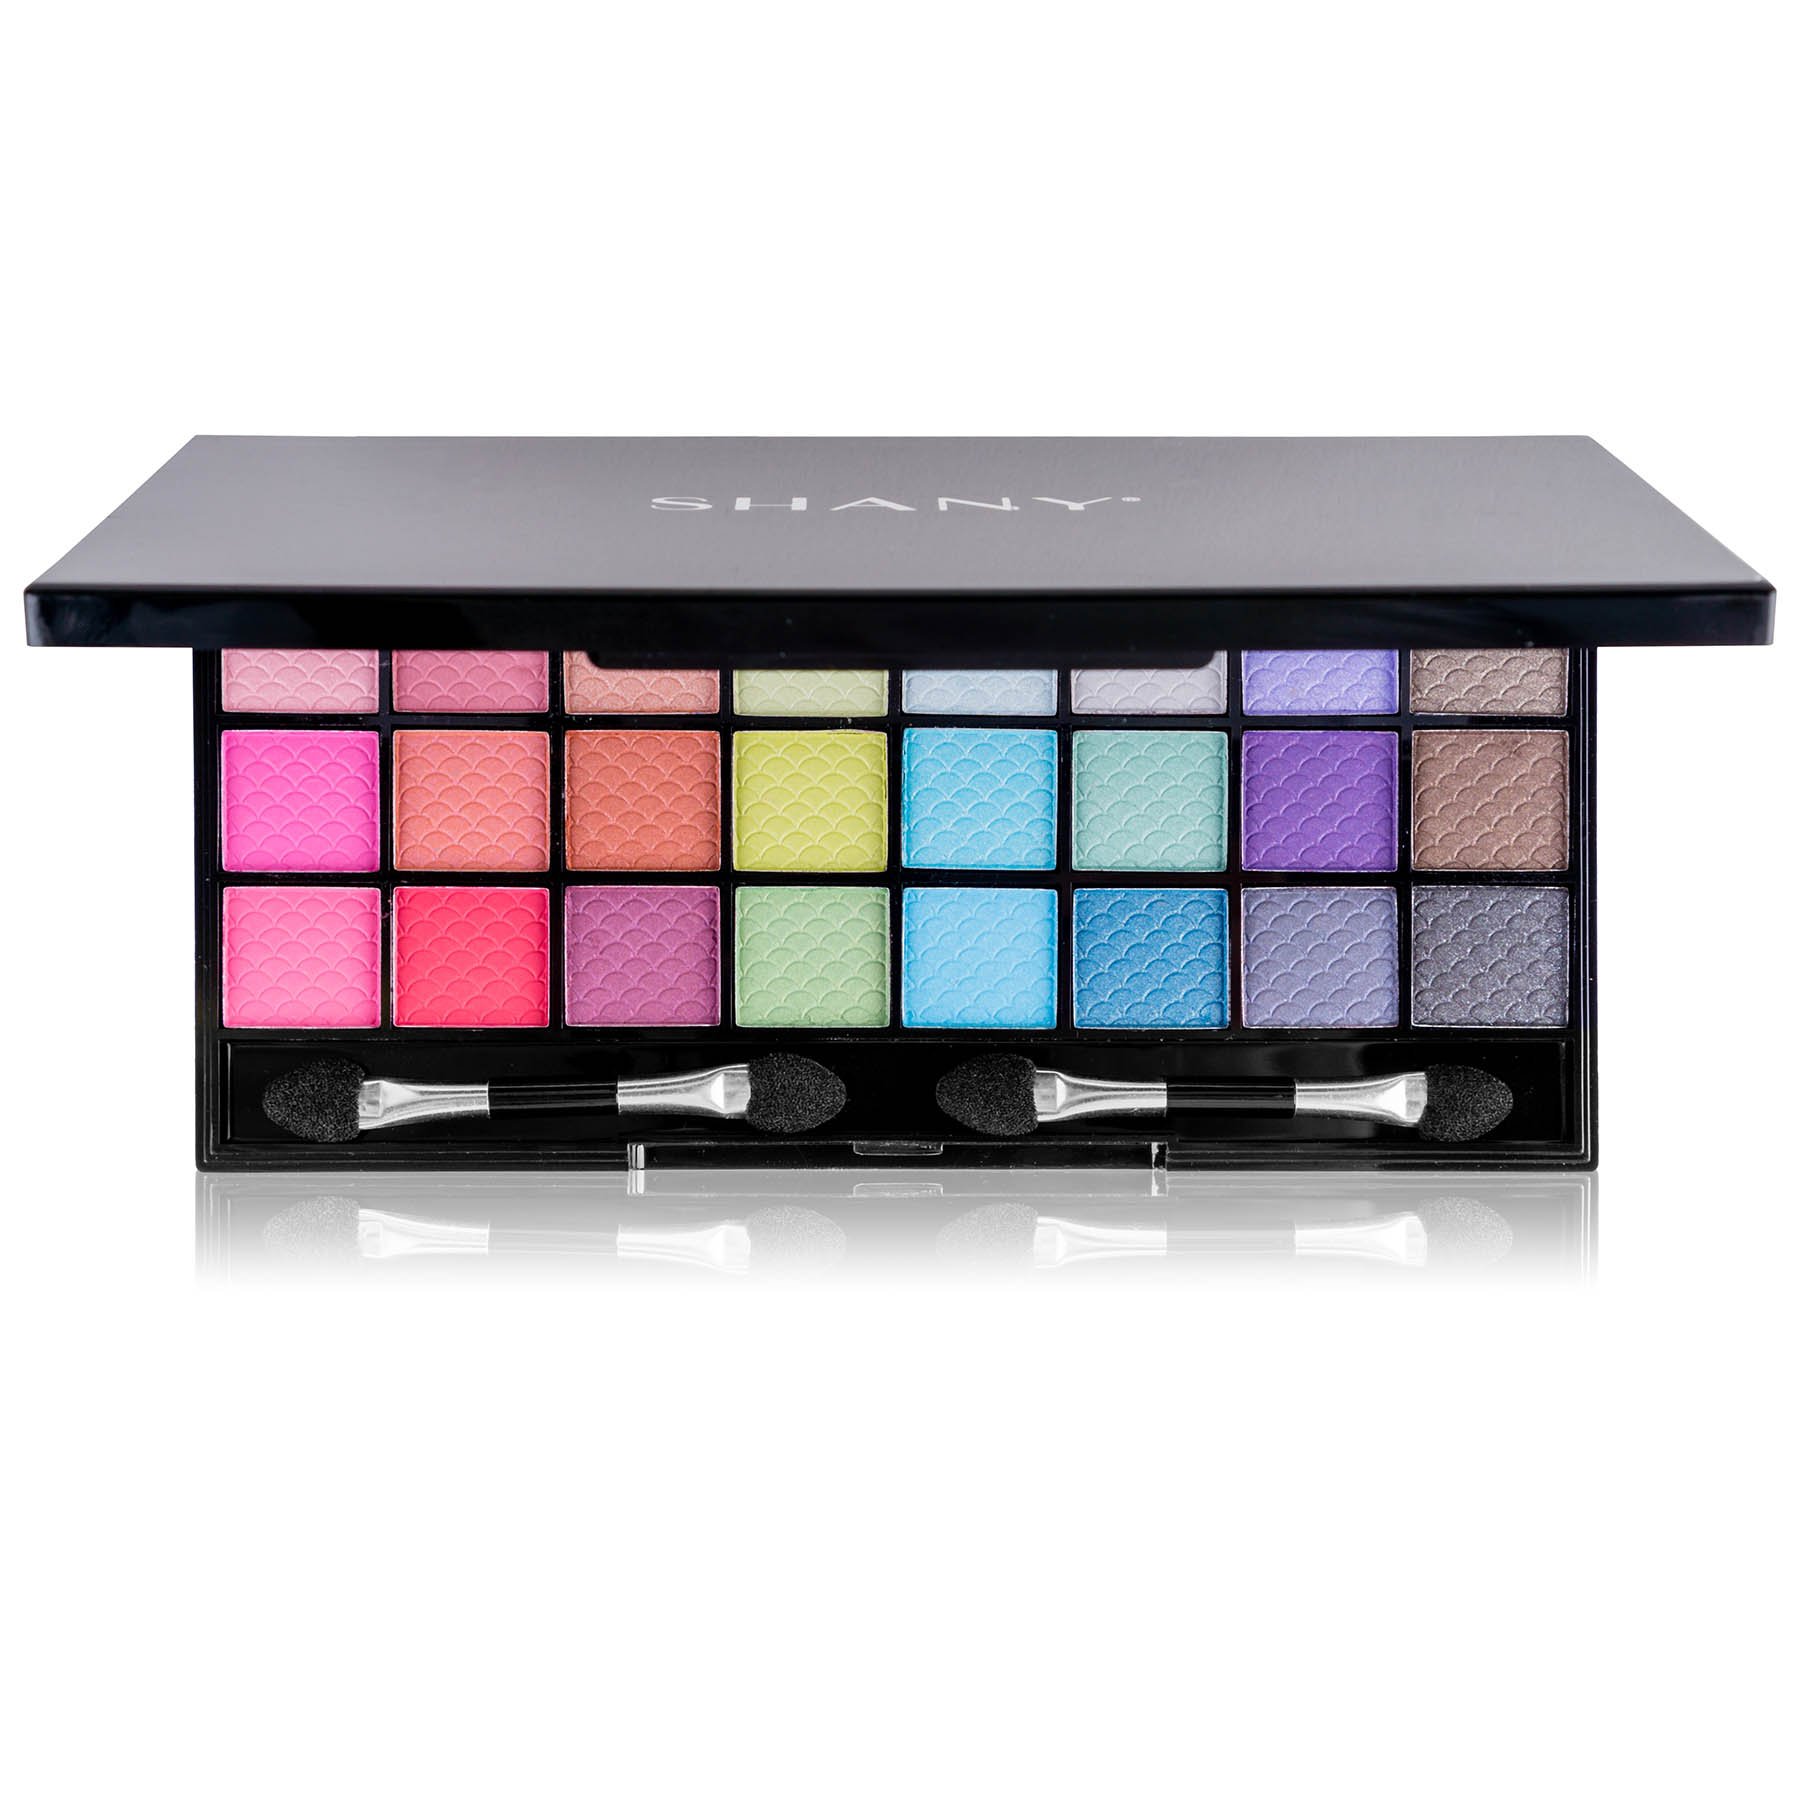 SHANY Classy & Sassy All-in-One Makeup Kit with Mirror, Applicators, 24 Eye Shadows, 18 Lip Glosses, 2 Blushes, and 1 Bronzer.